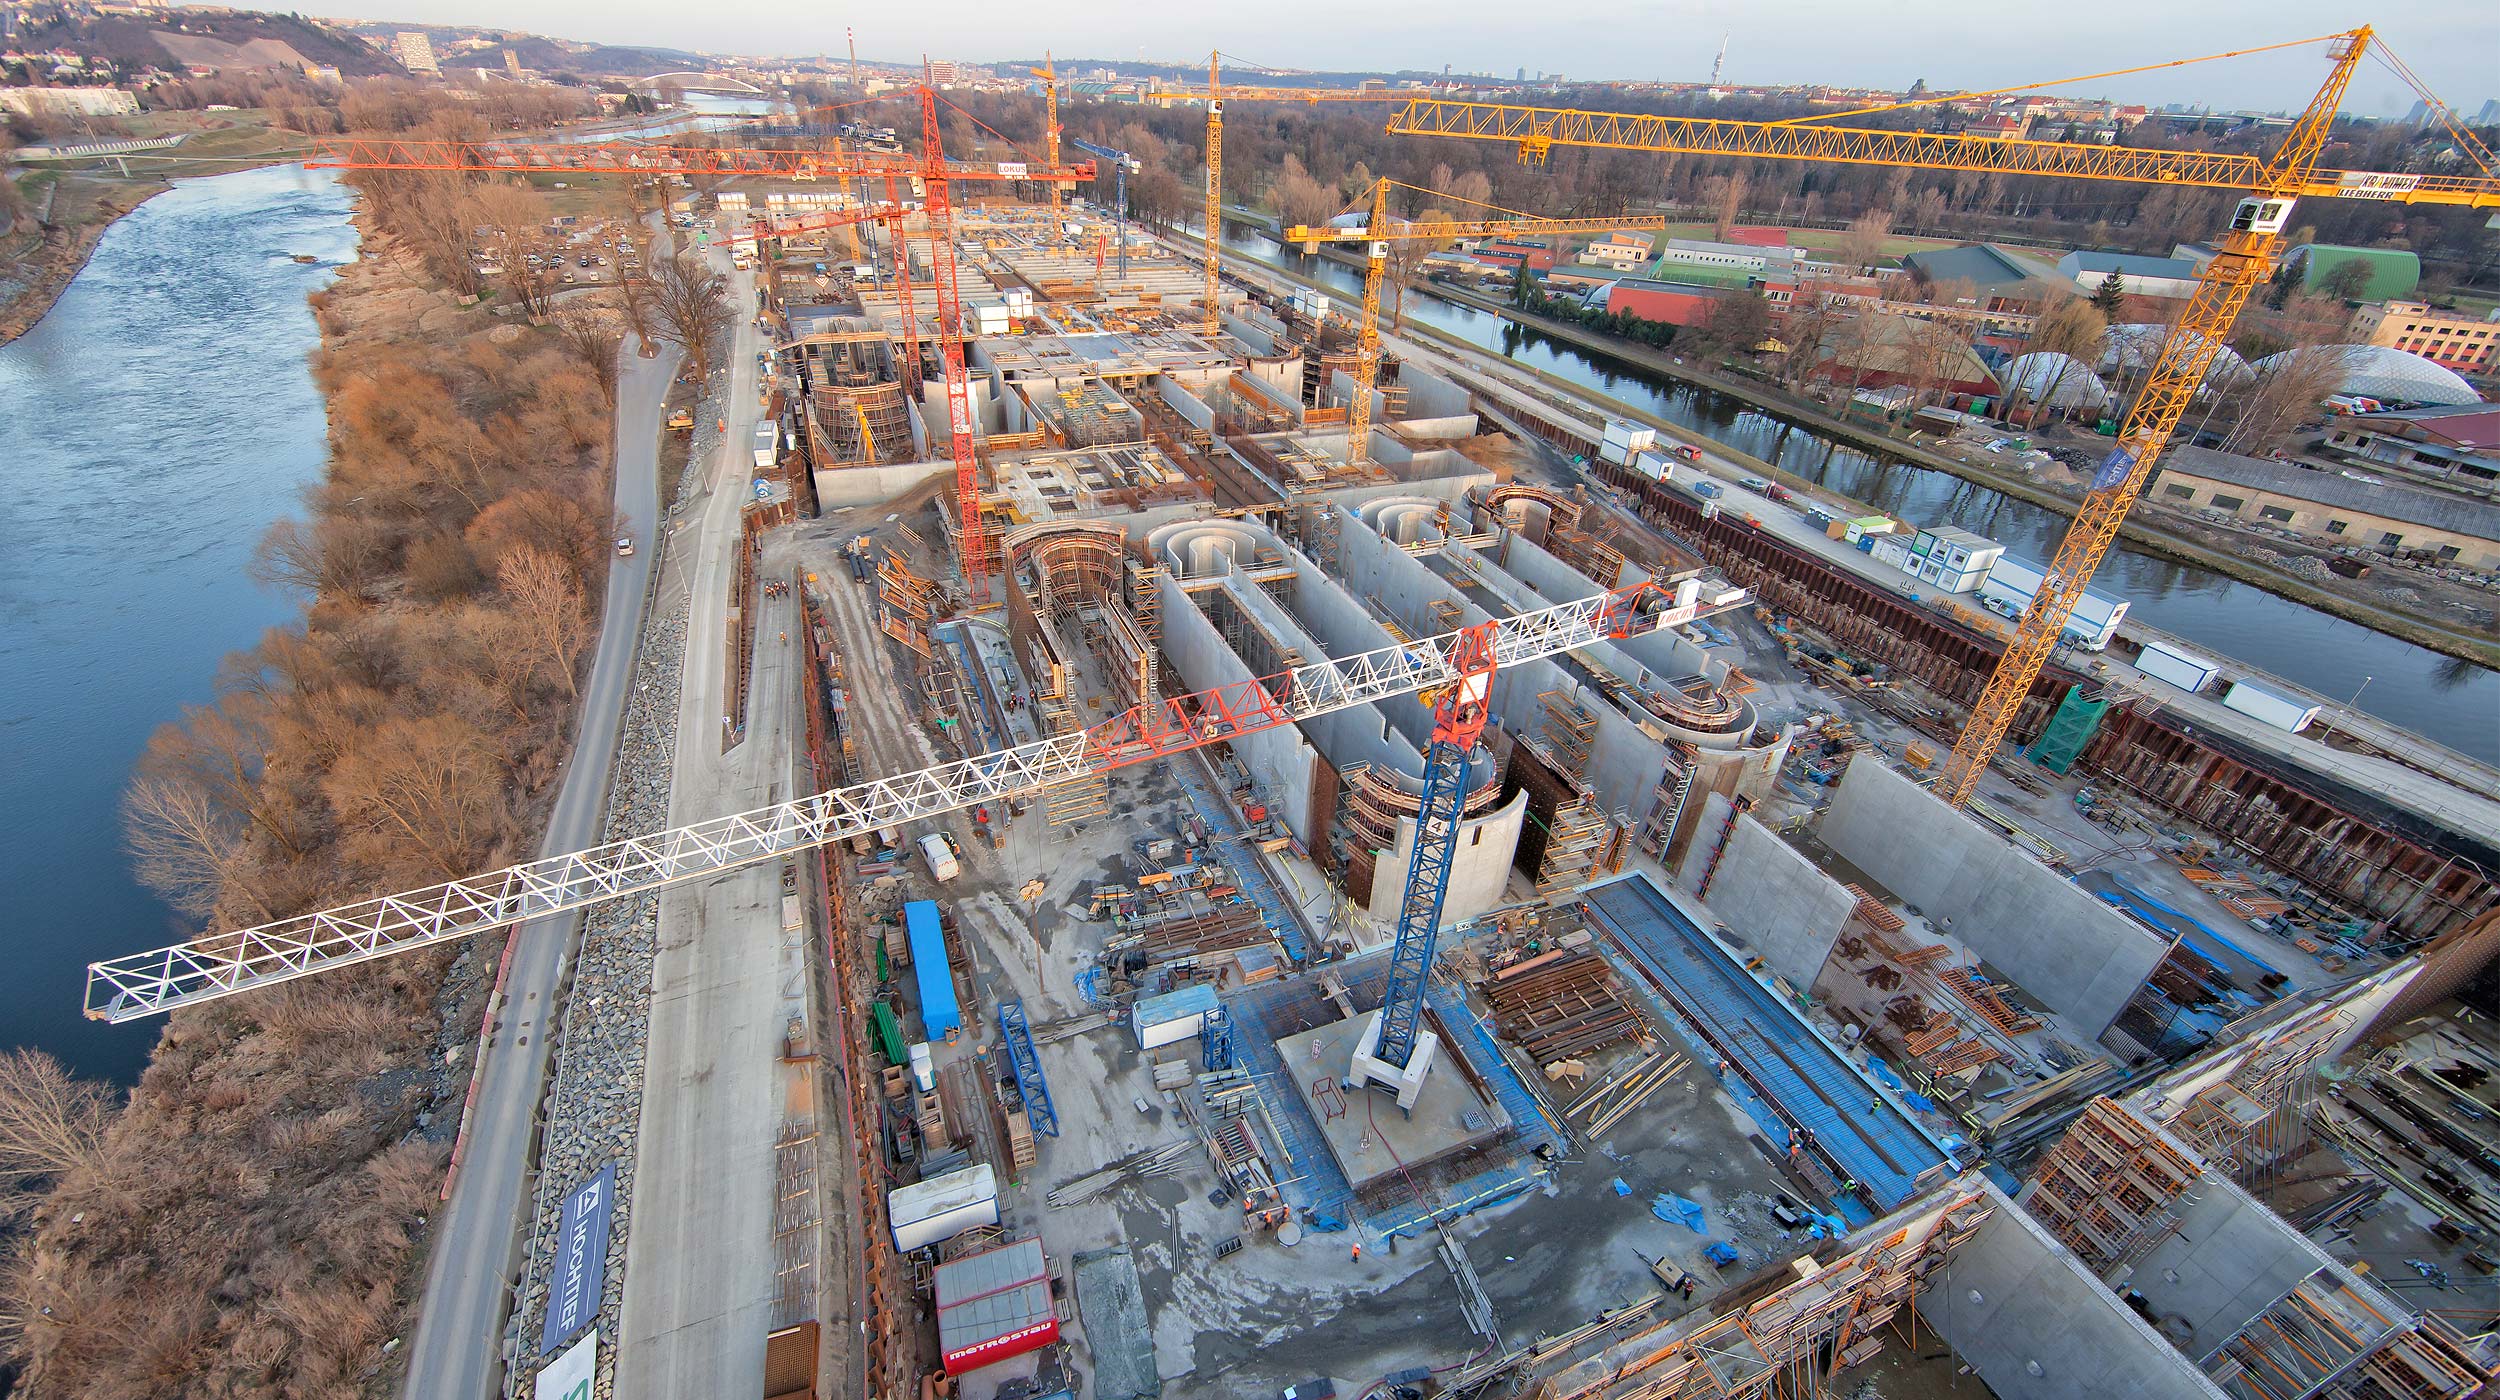 The new water treatment plant in Prague is the biggest project in the Czech Republic currently underway, and when completed will be the largest facility of its kind in all of Central Europe.